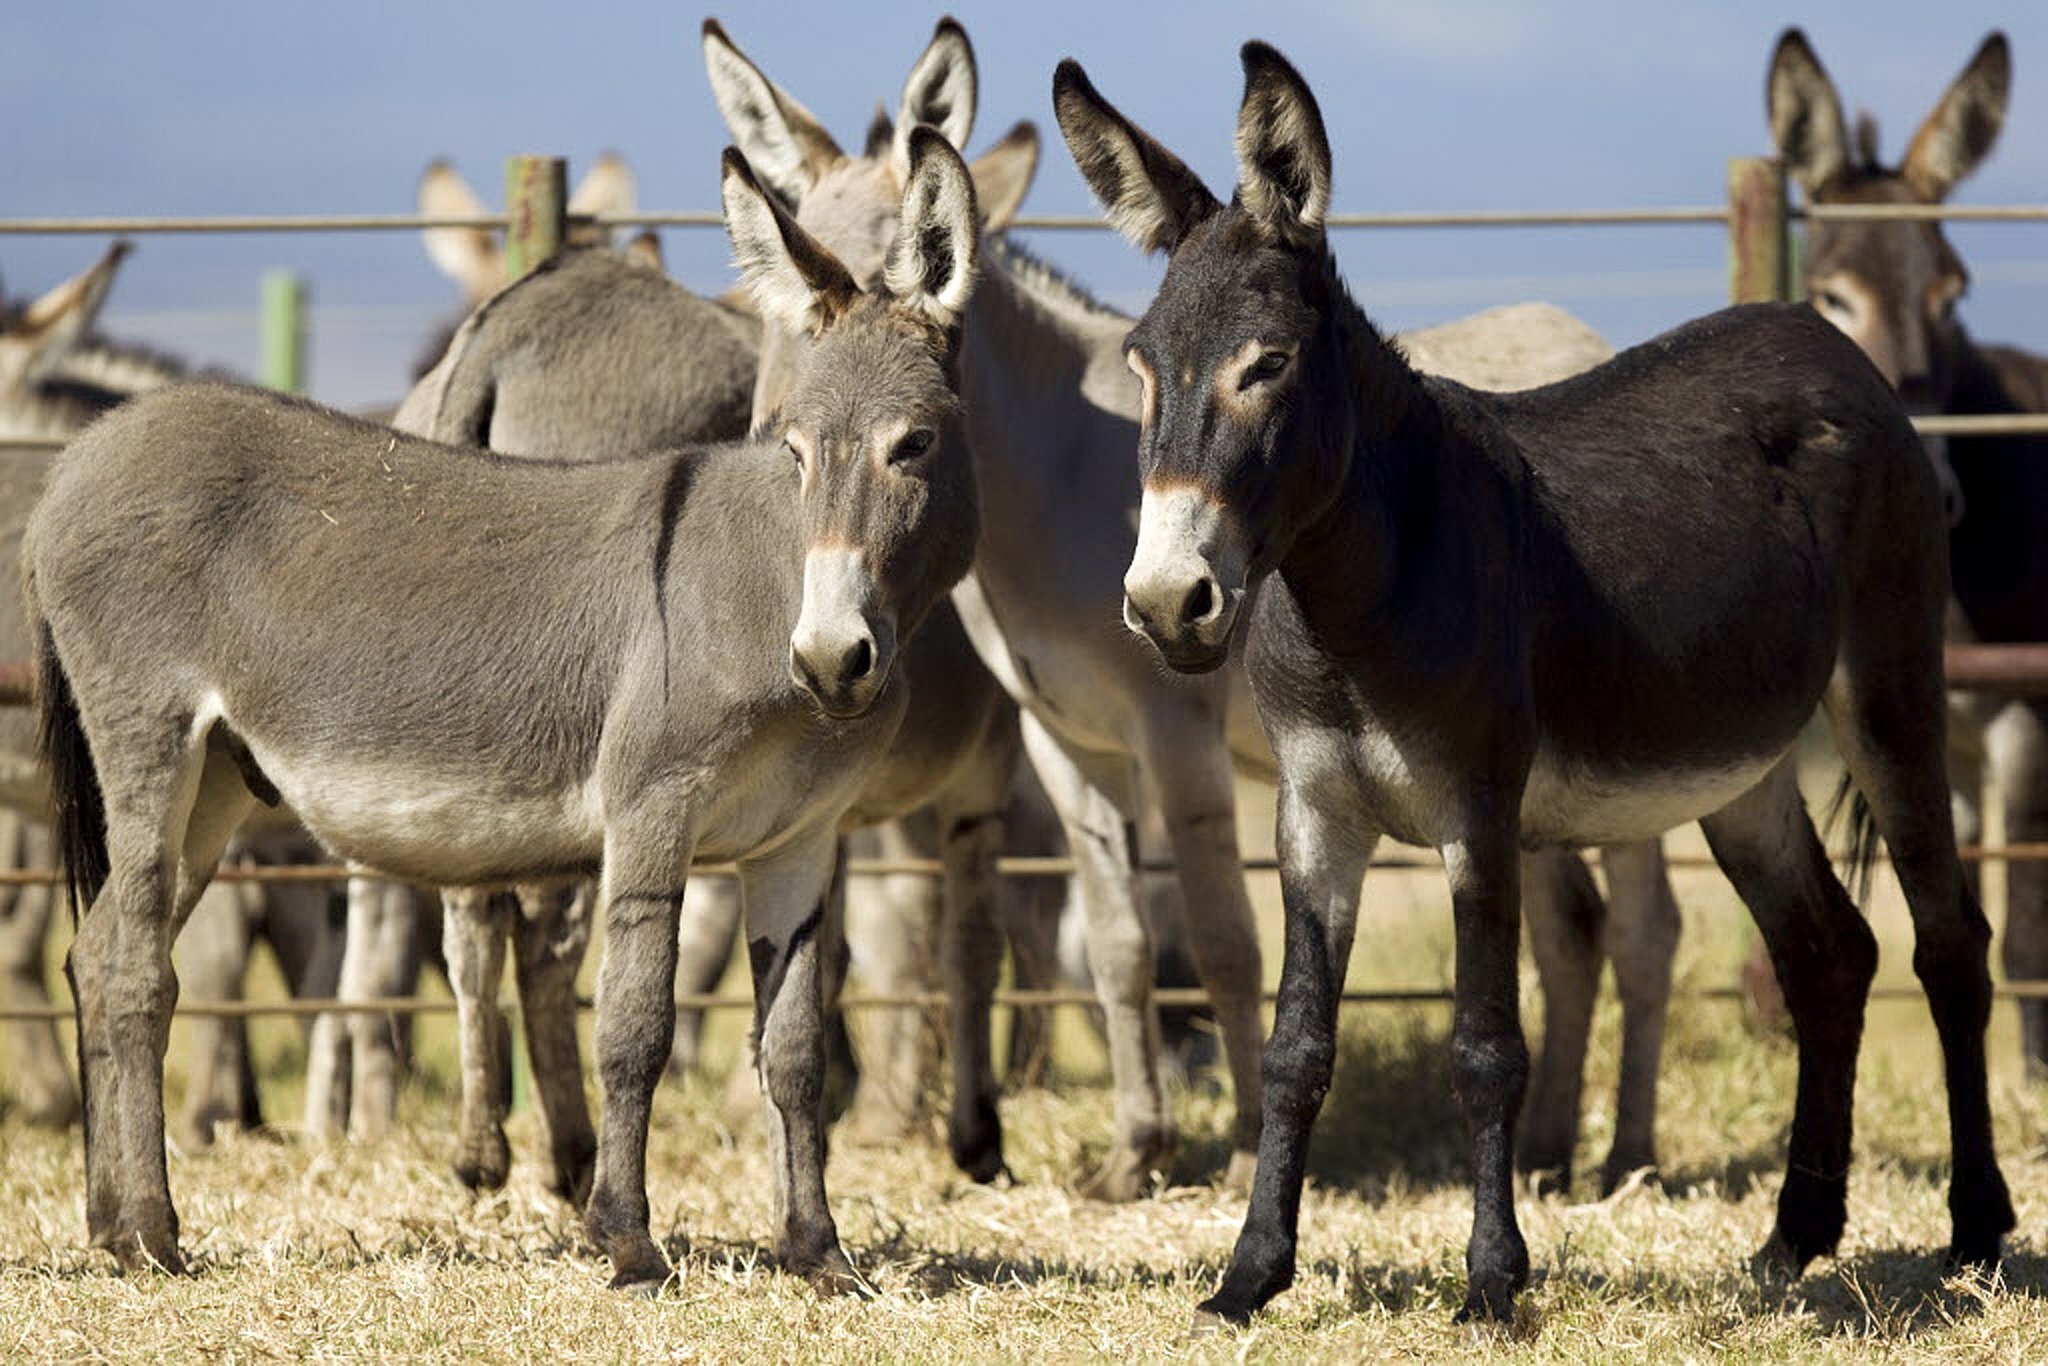 Donkeys up for adoption in Hawaii, but only in pairs - The San Diego ...